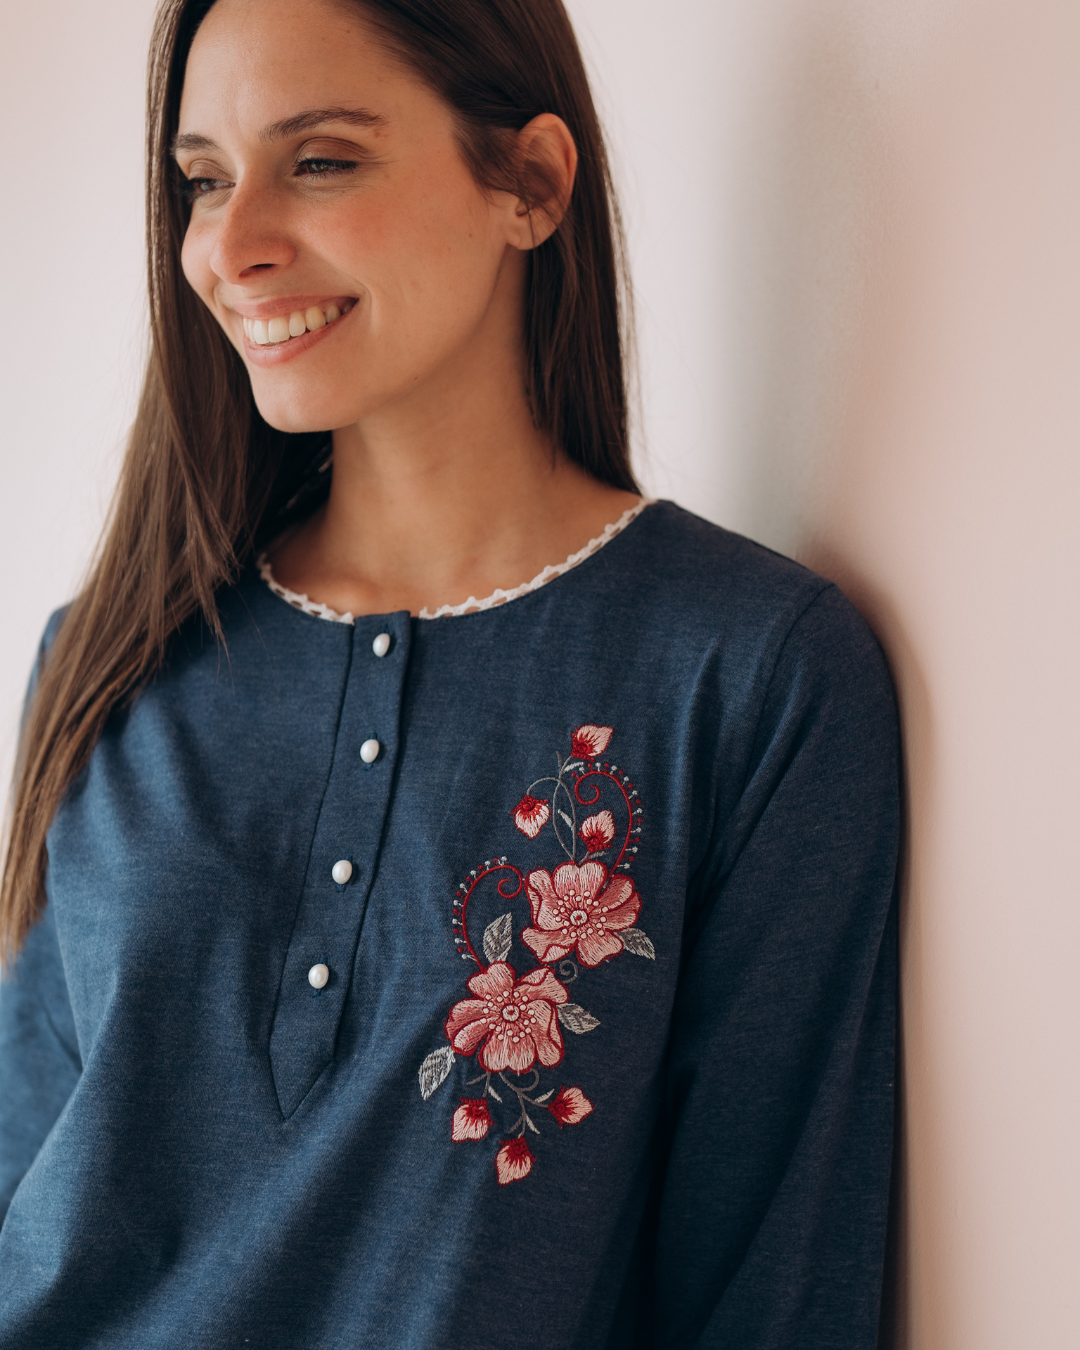 Women's single embroidered cotton shirt with round neck and sleeves